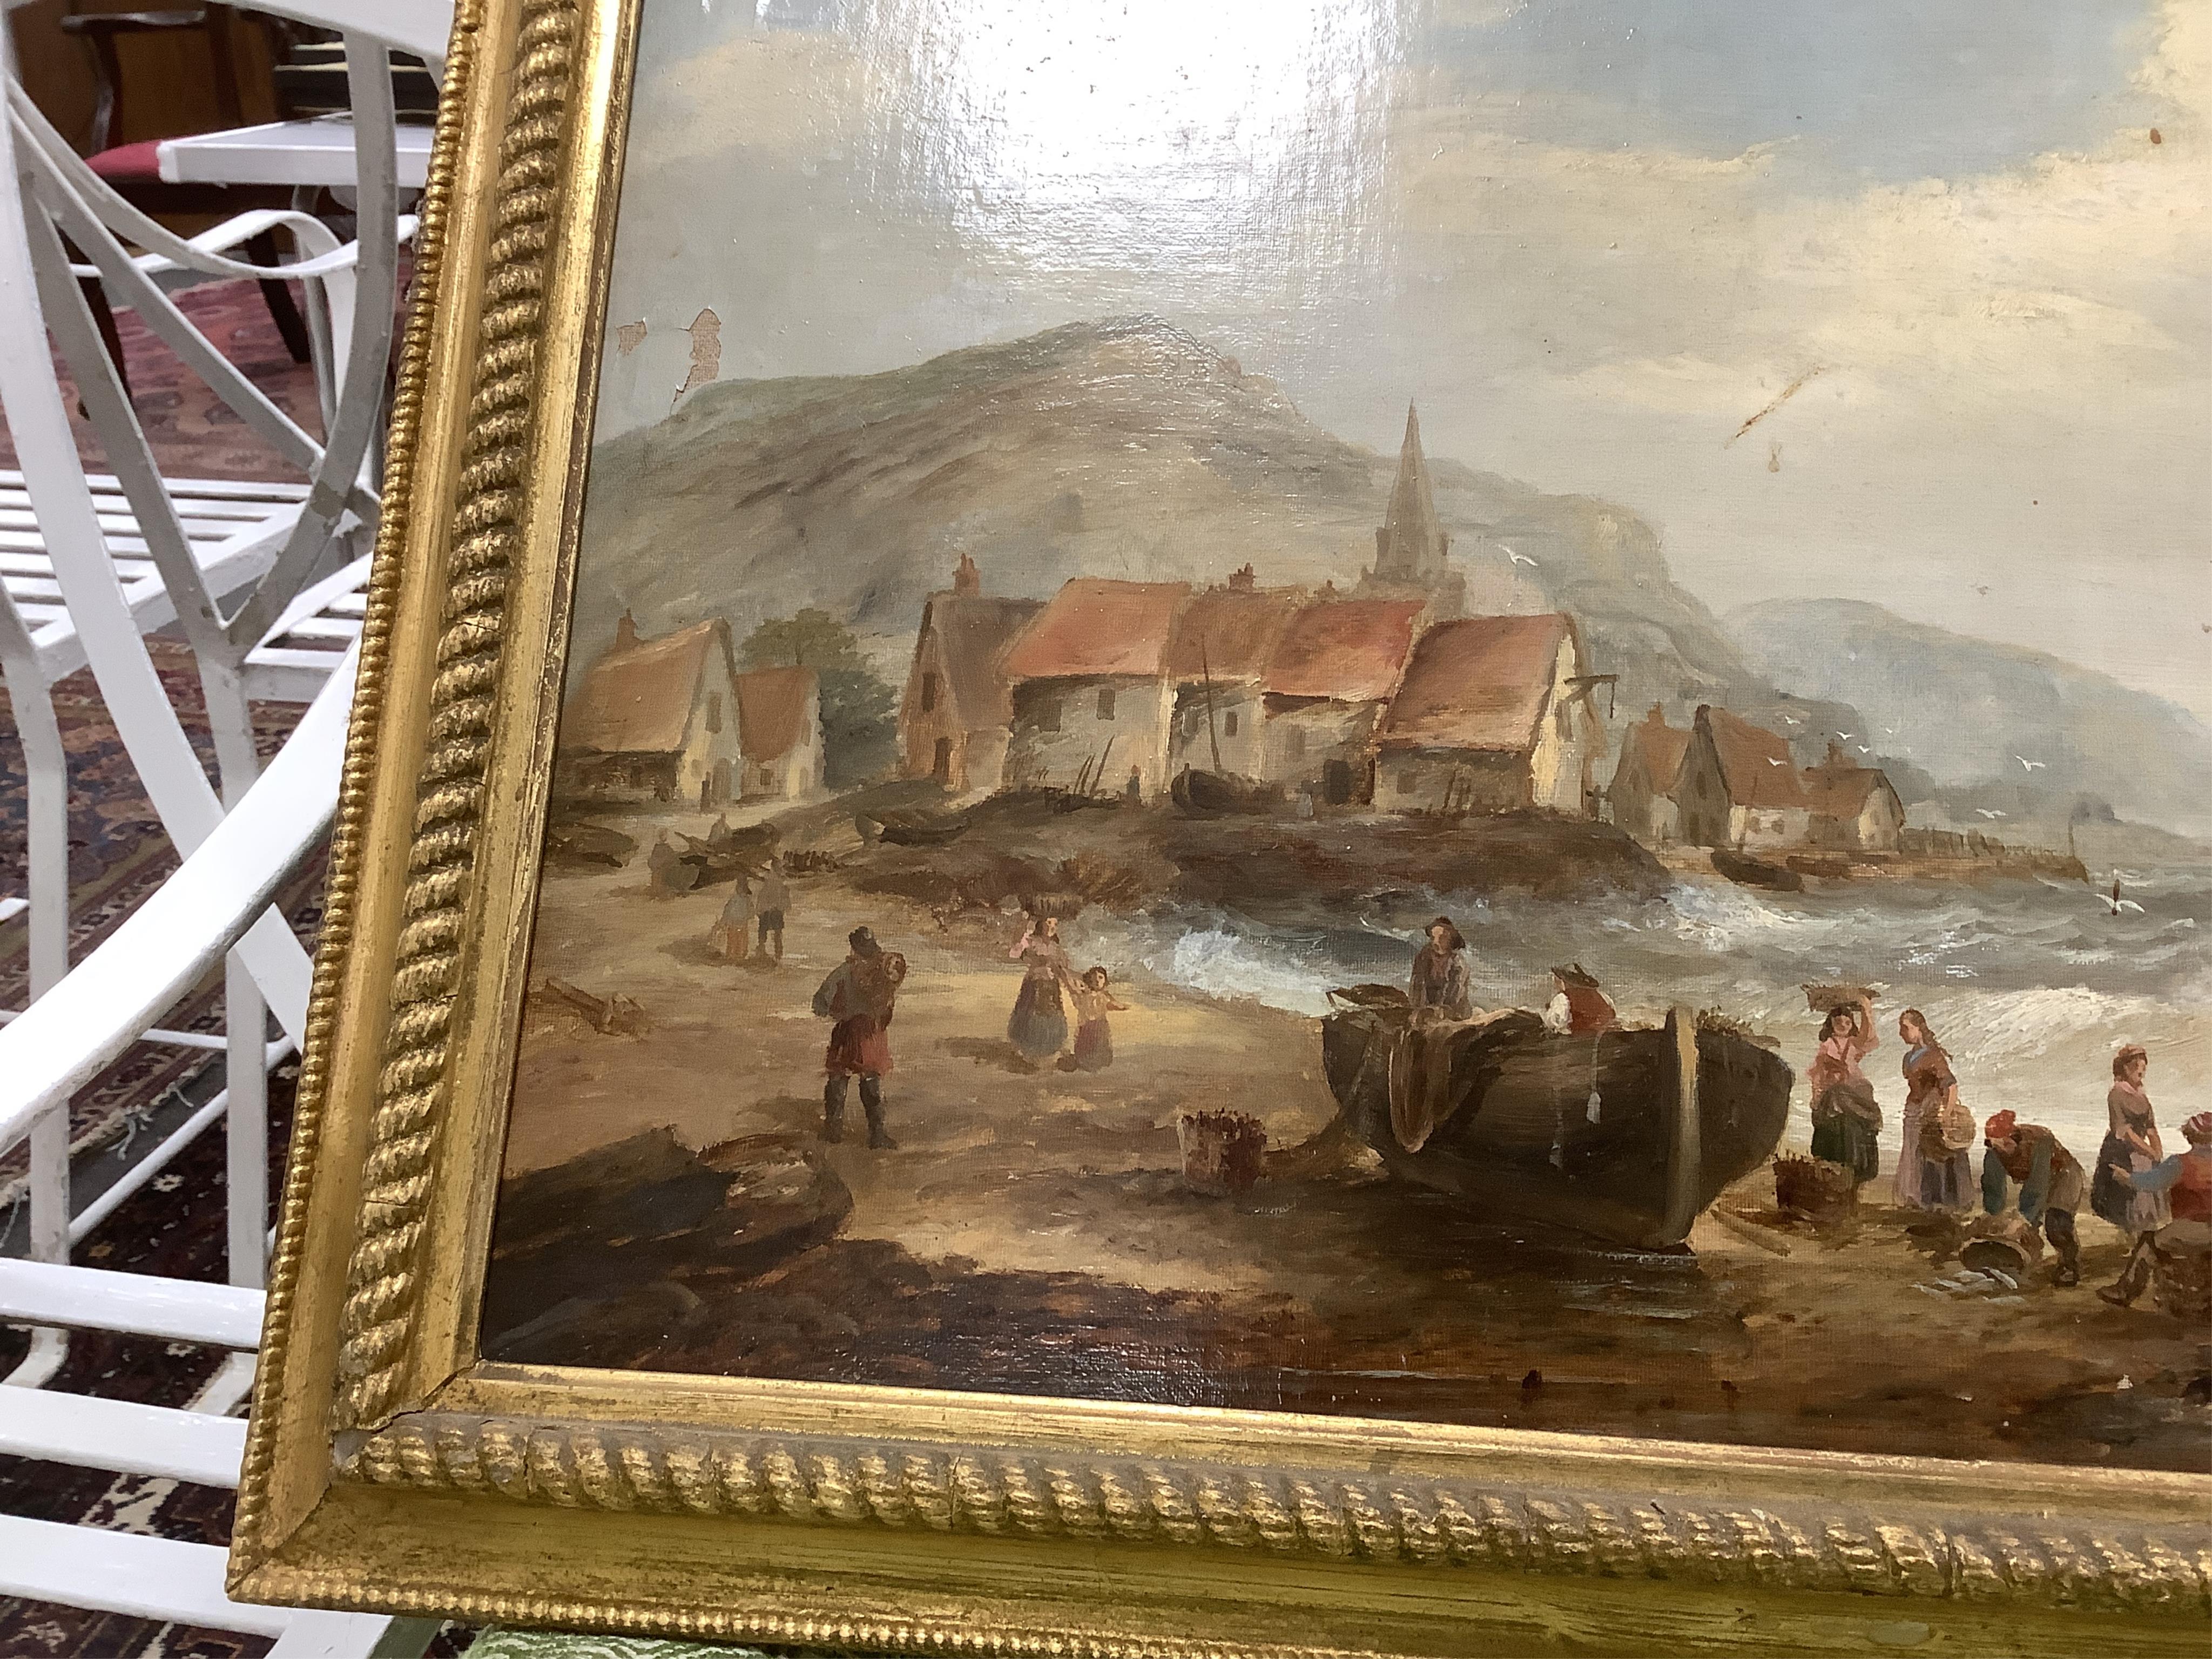 British School, 19th century, oil on canvas, Beach scene with figures, fishing boats, village and hills beyond, 37 x 67cm. Condition - fair, some losses to the paint